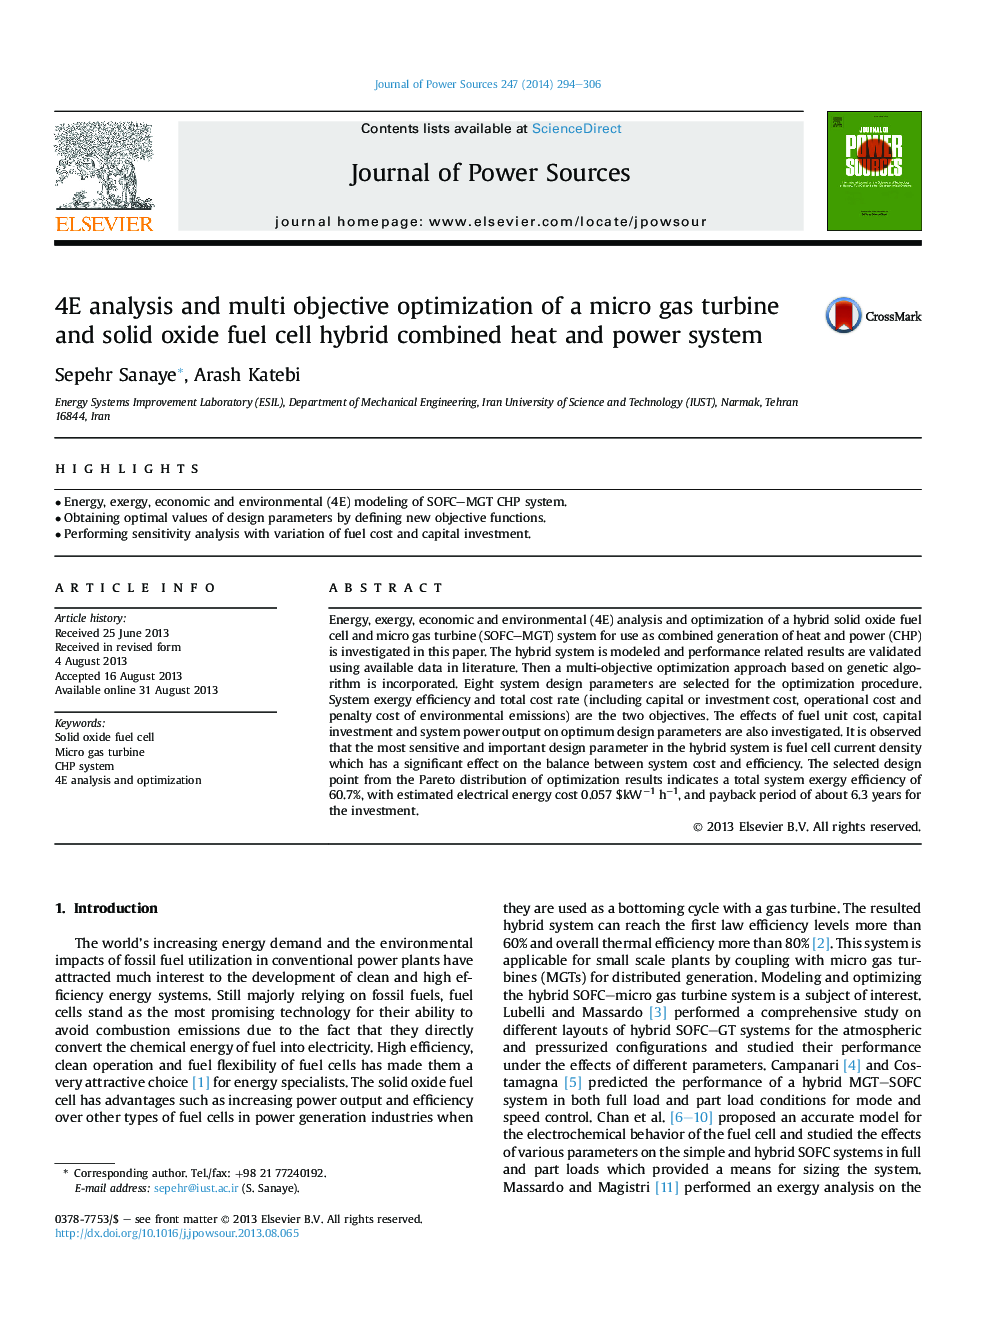 4E analysis and multi objective optimization of a micro gas turbine and solid oxide fuel cell hybrid combined heat and power system